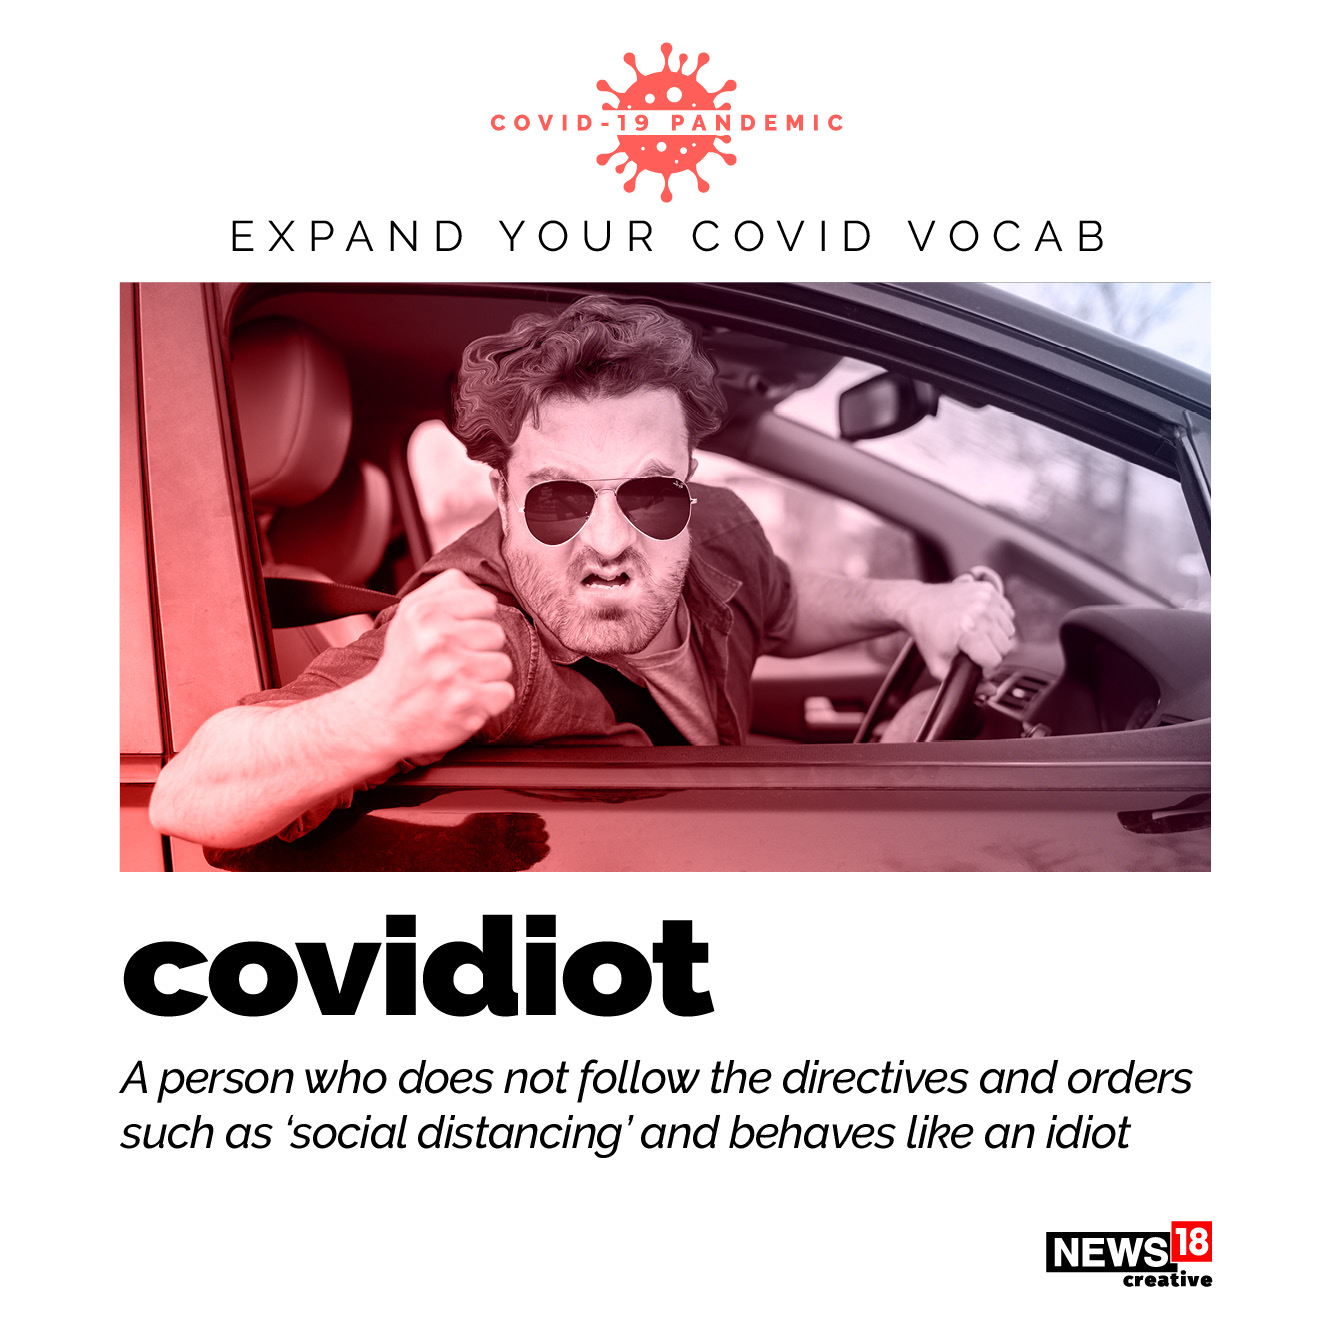 Are you a prepper or a Covidiot? Catch up on all the Covid lingo